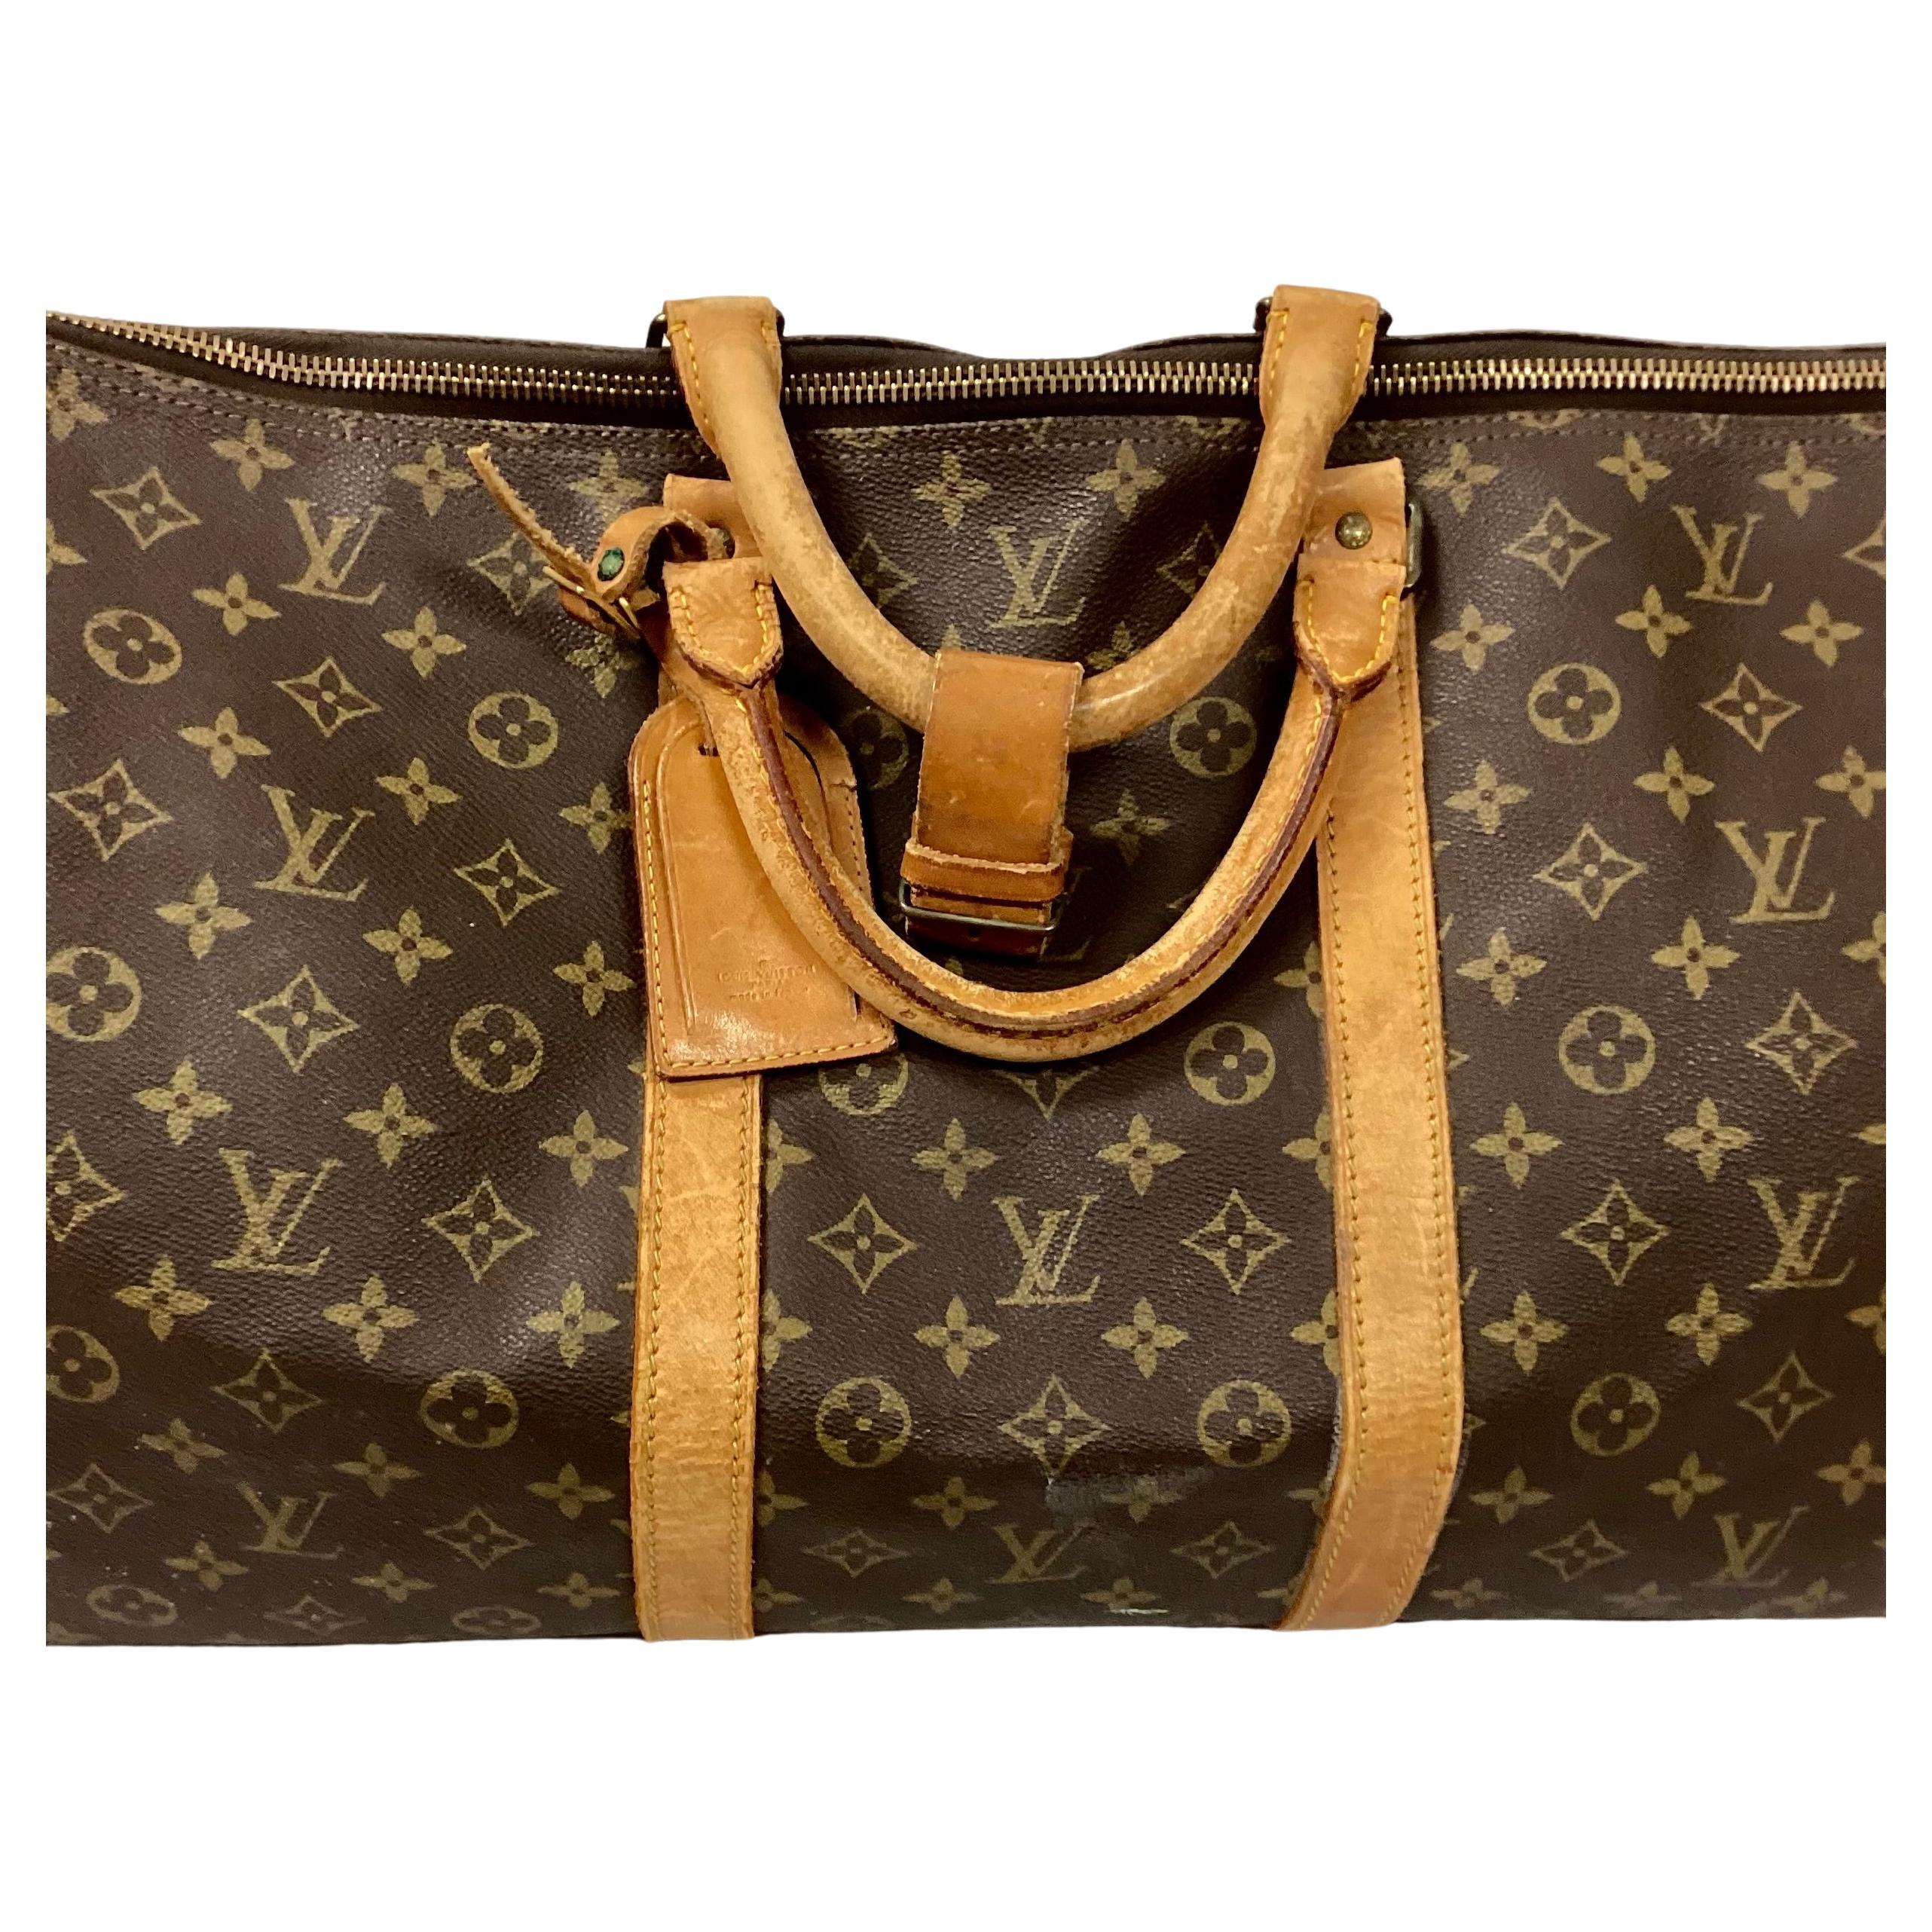 French Louie Vuitton Monogram Keepall Travel  Bag For Sale